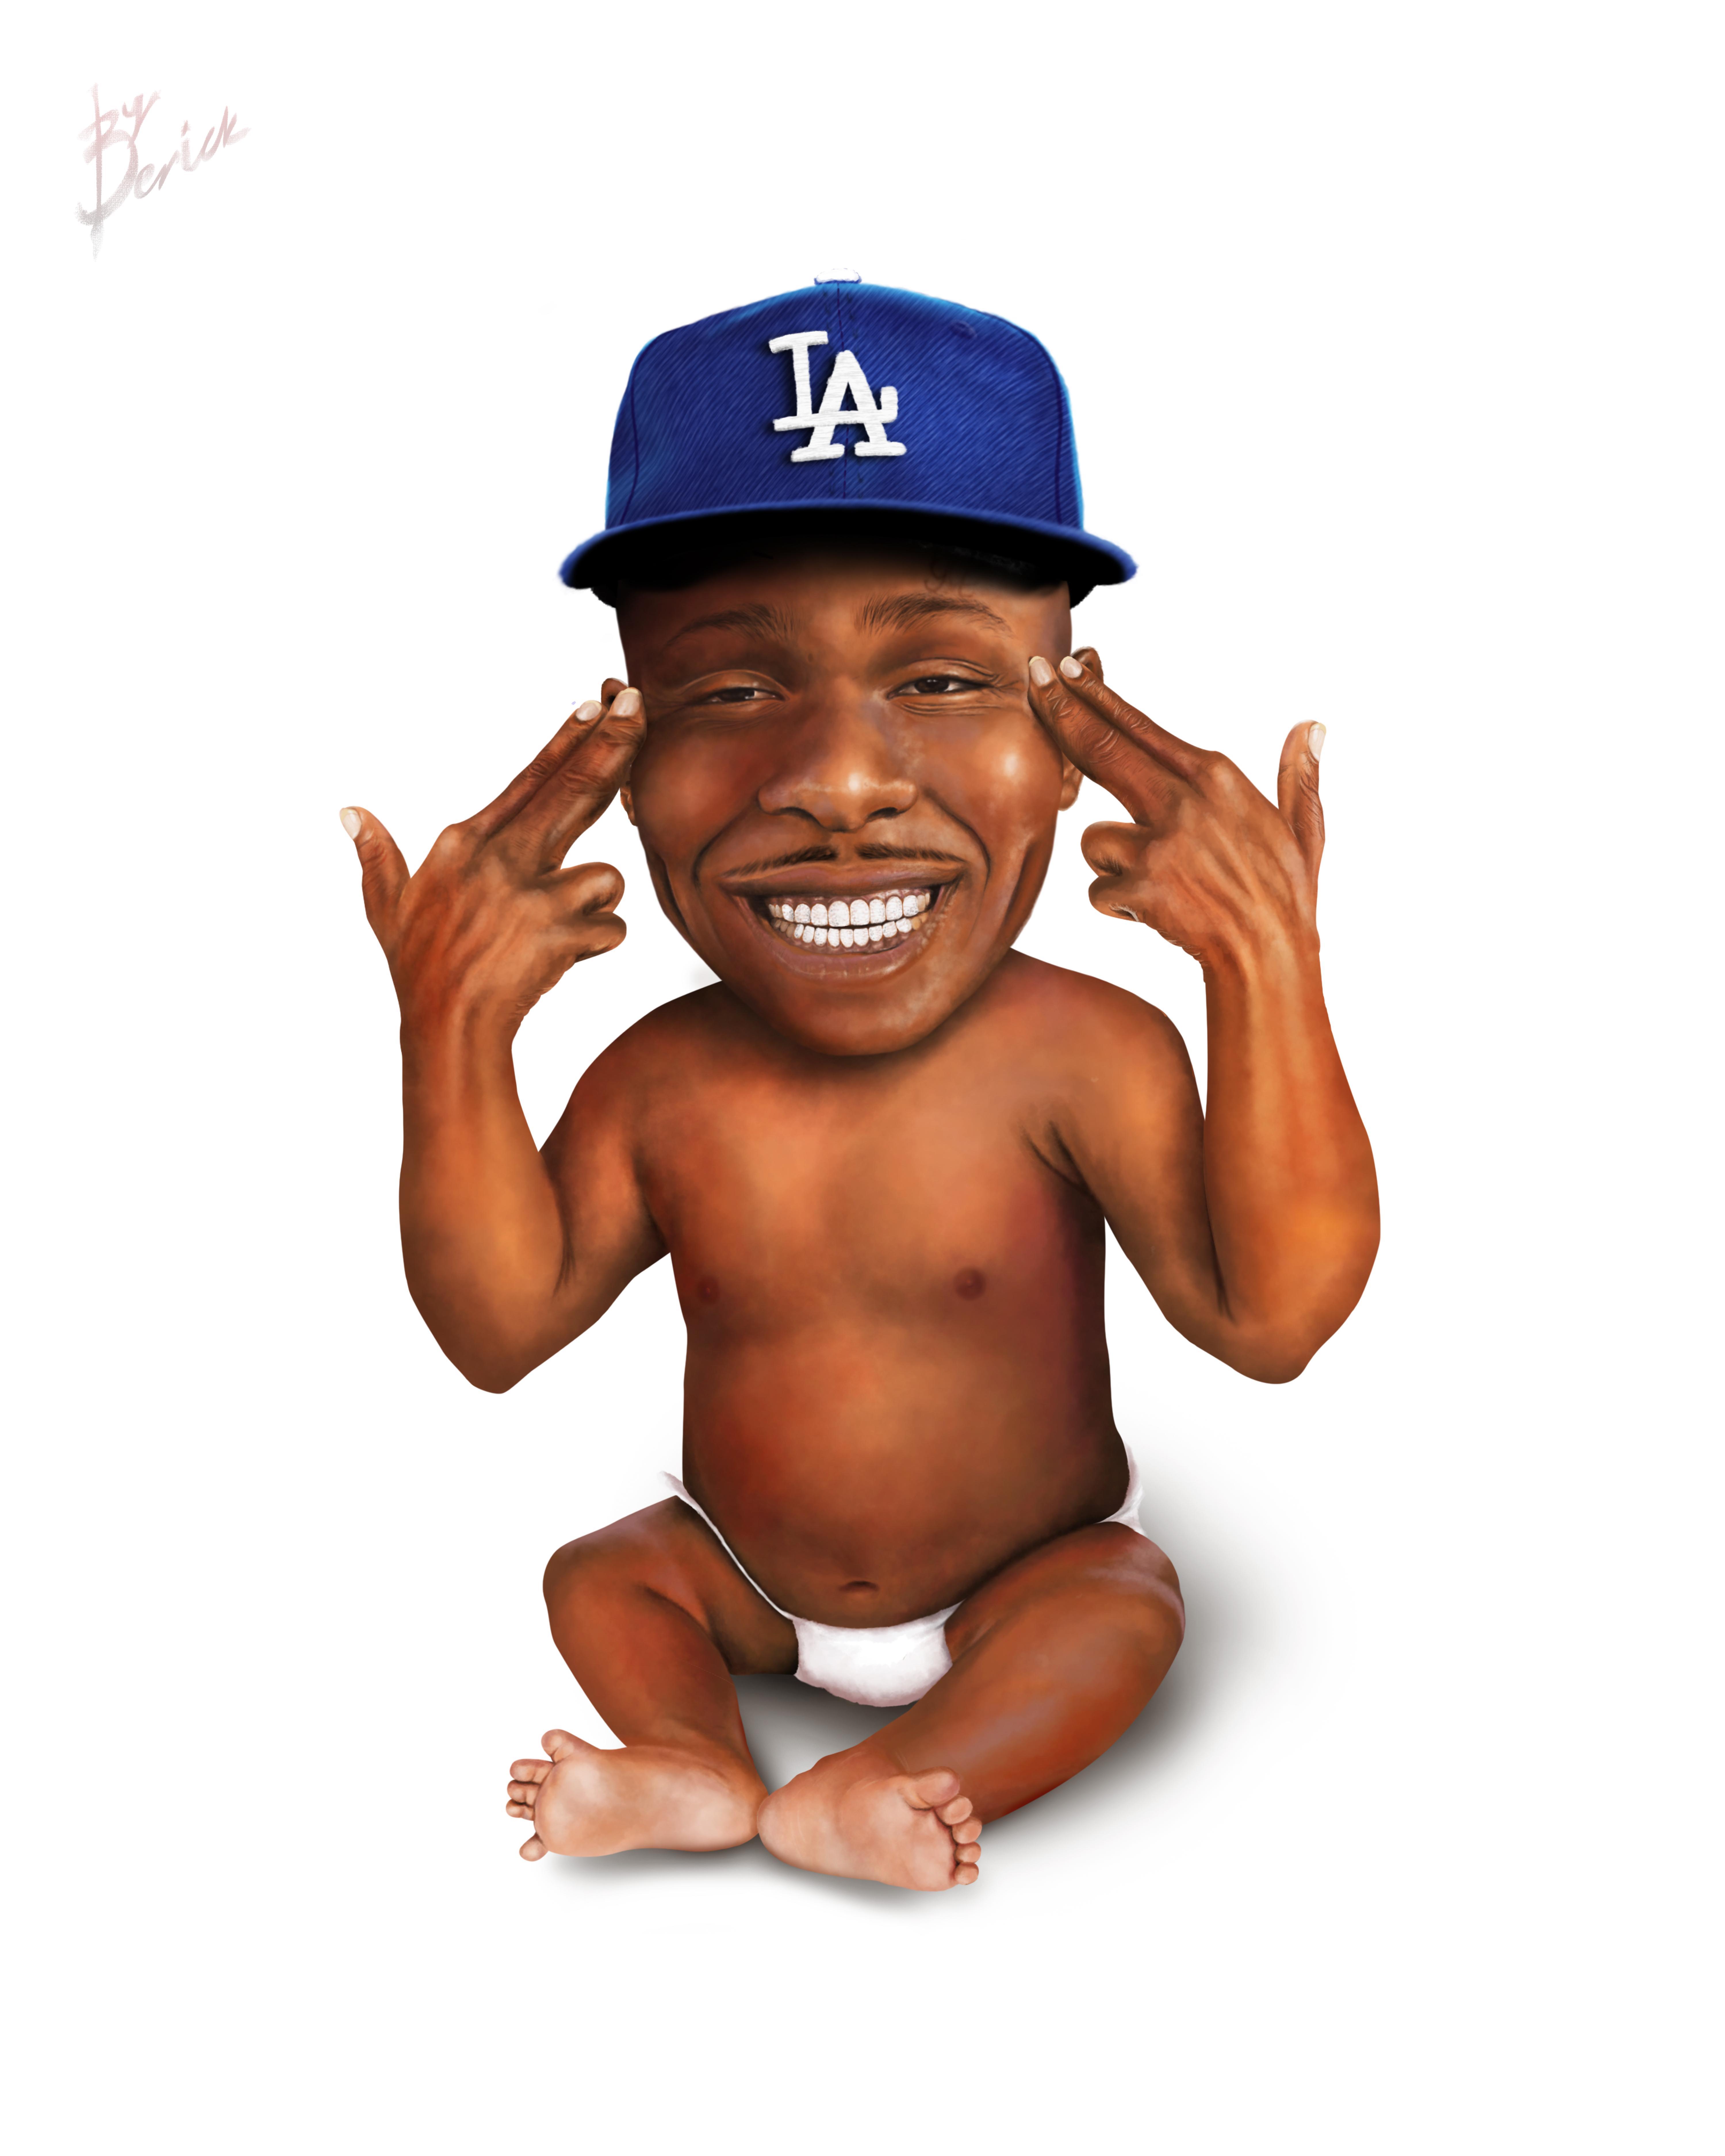 Digital Painting of DaBaby by me (zoom in)